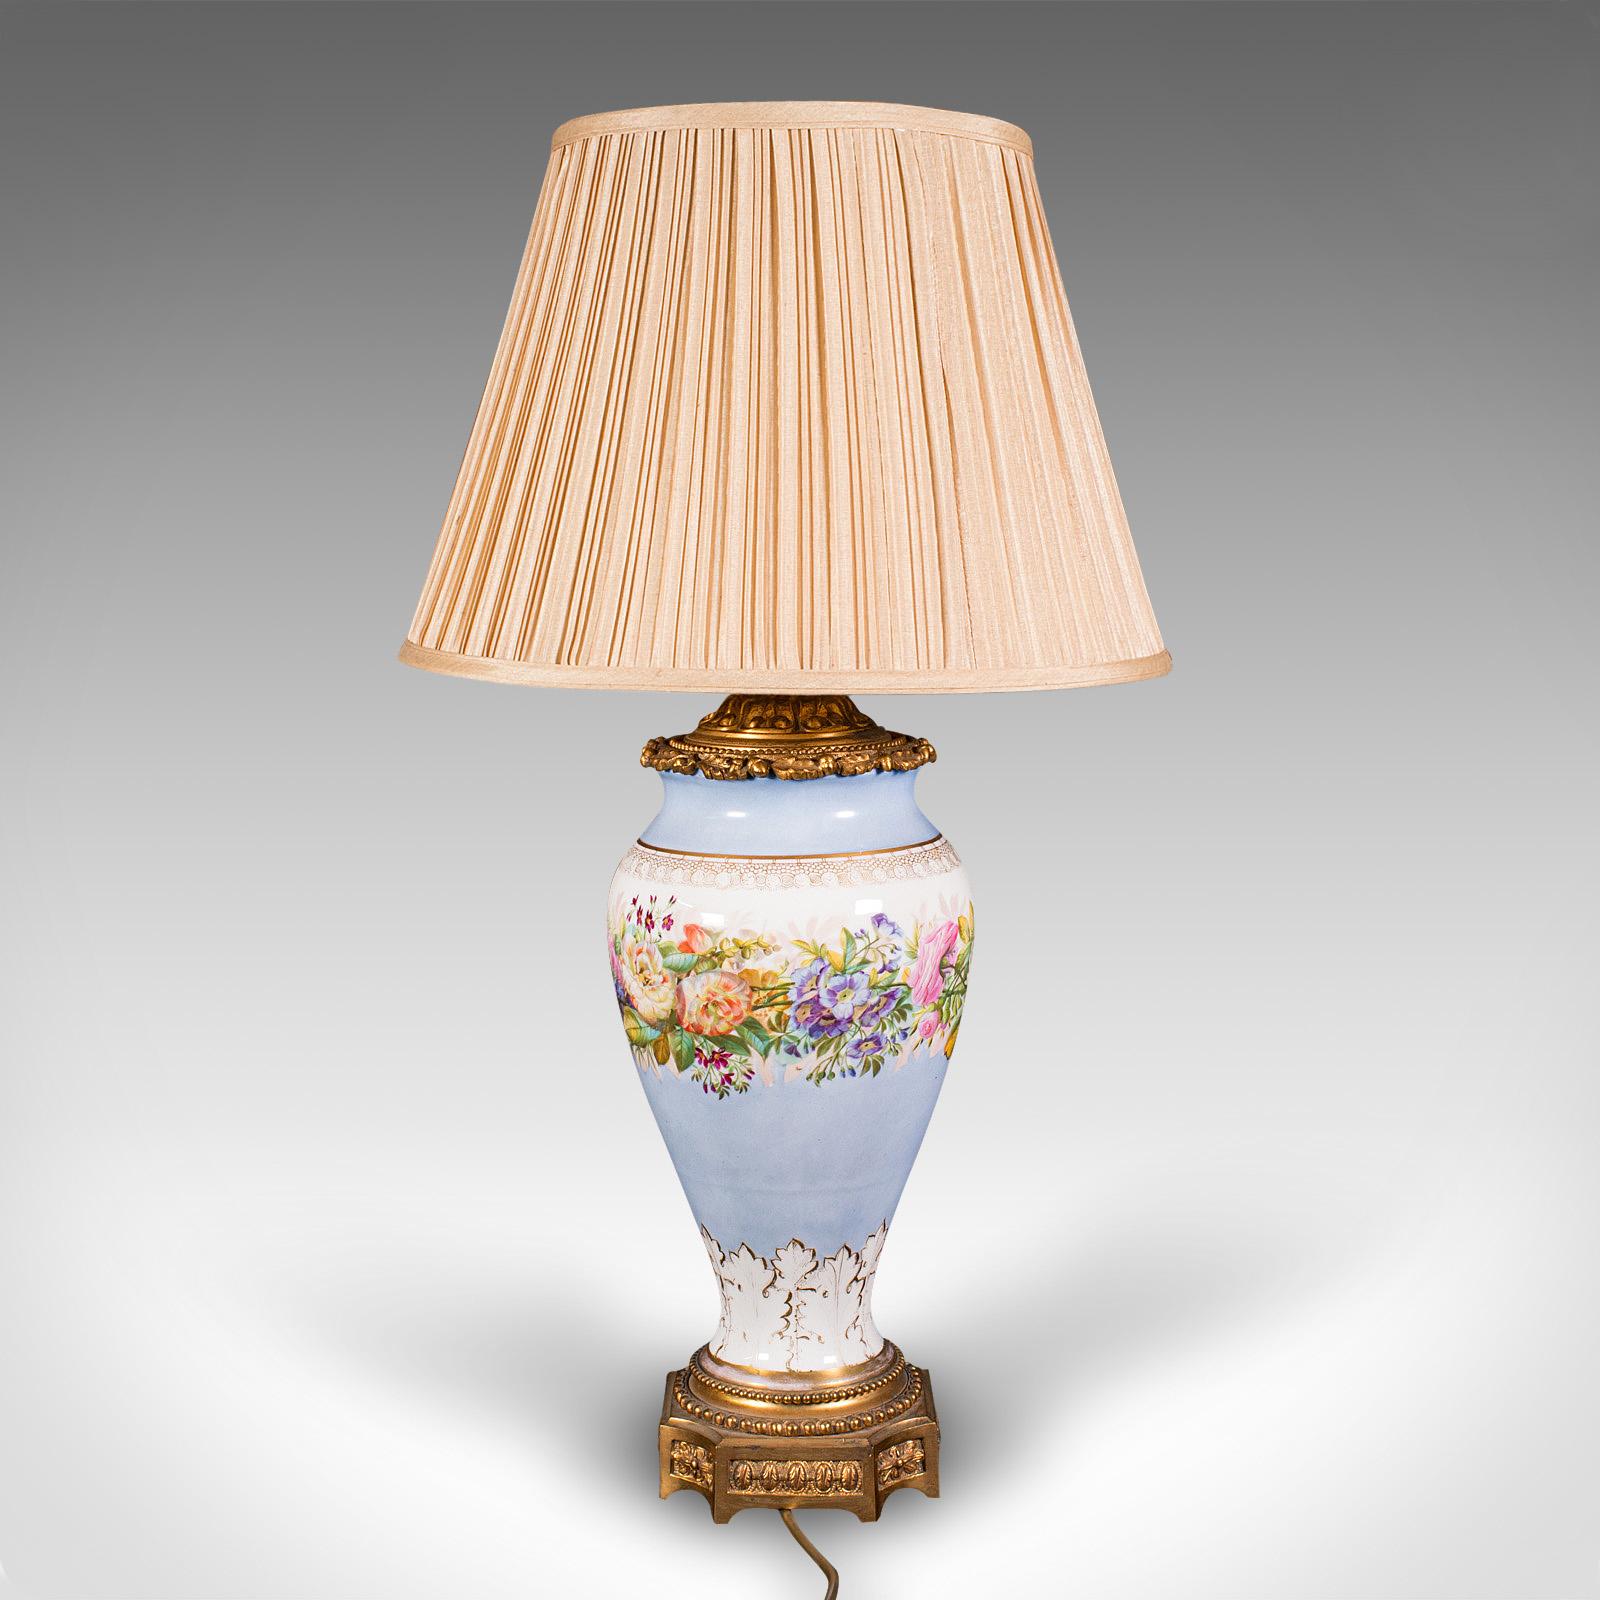 20th Century Vintage Cafe Lamp, French, Ceramic, Gilt Metal, Decorative Table Light, C.1930 For Sale